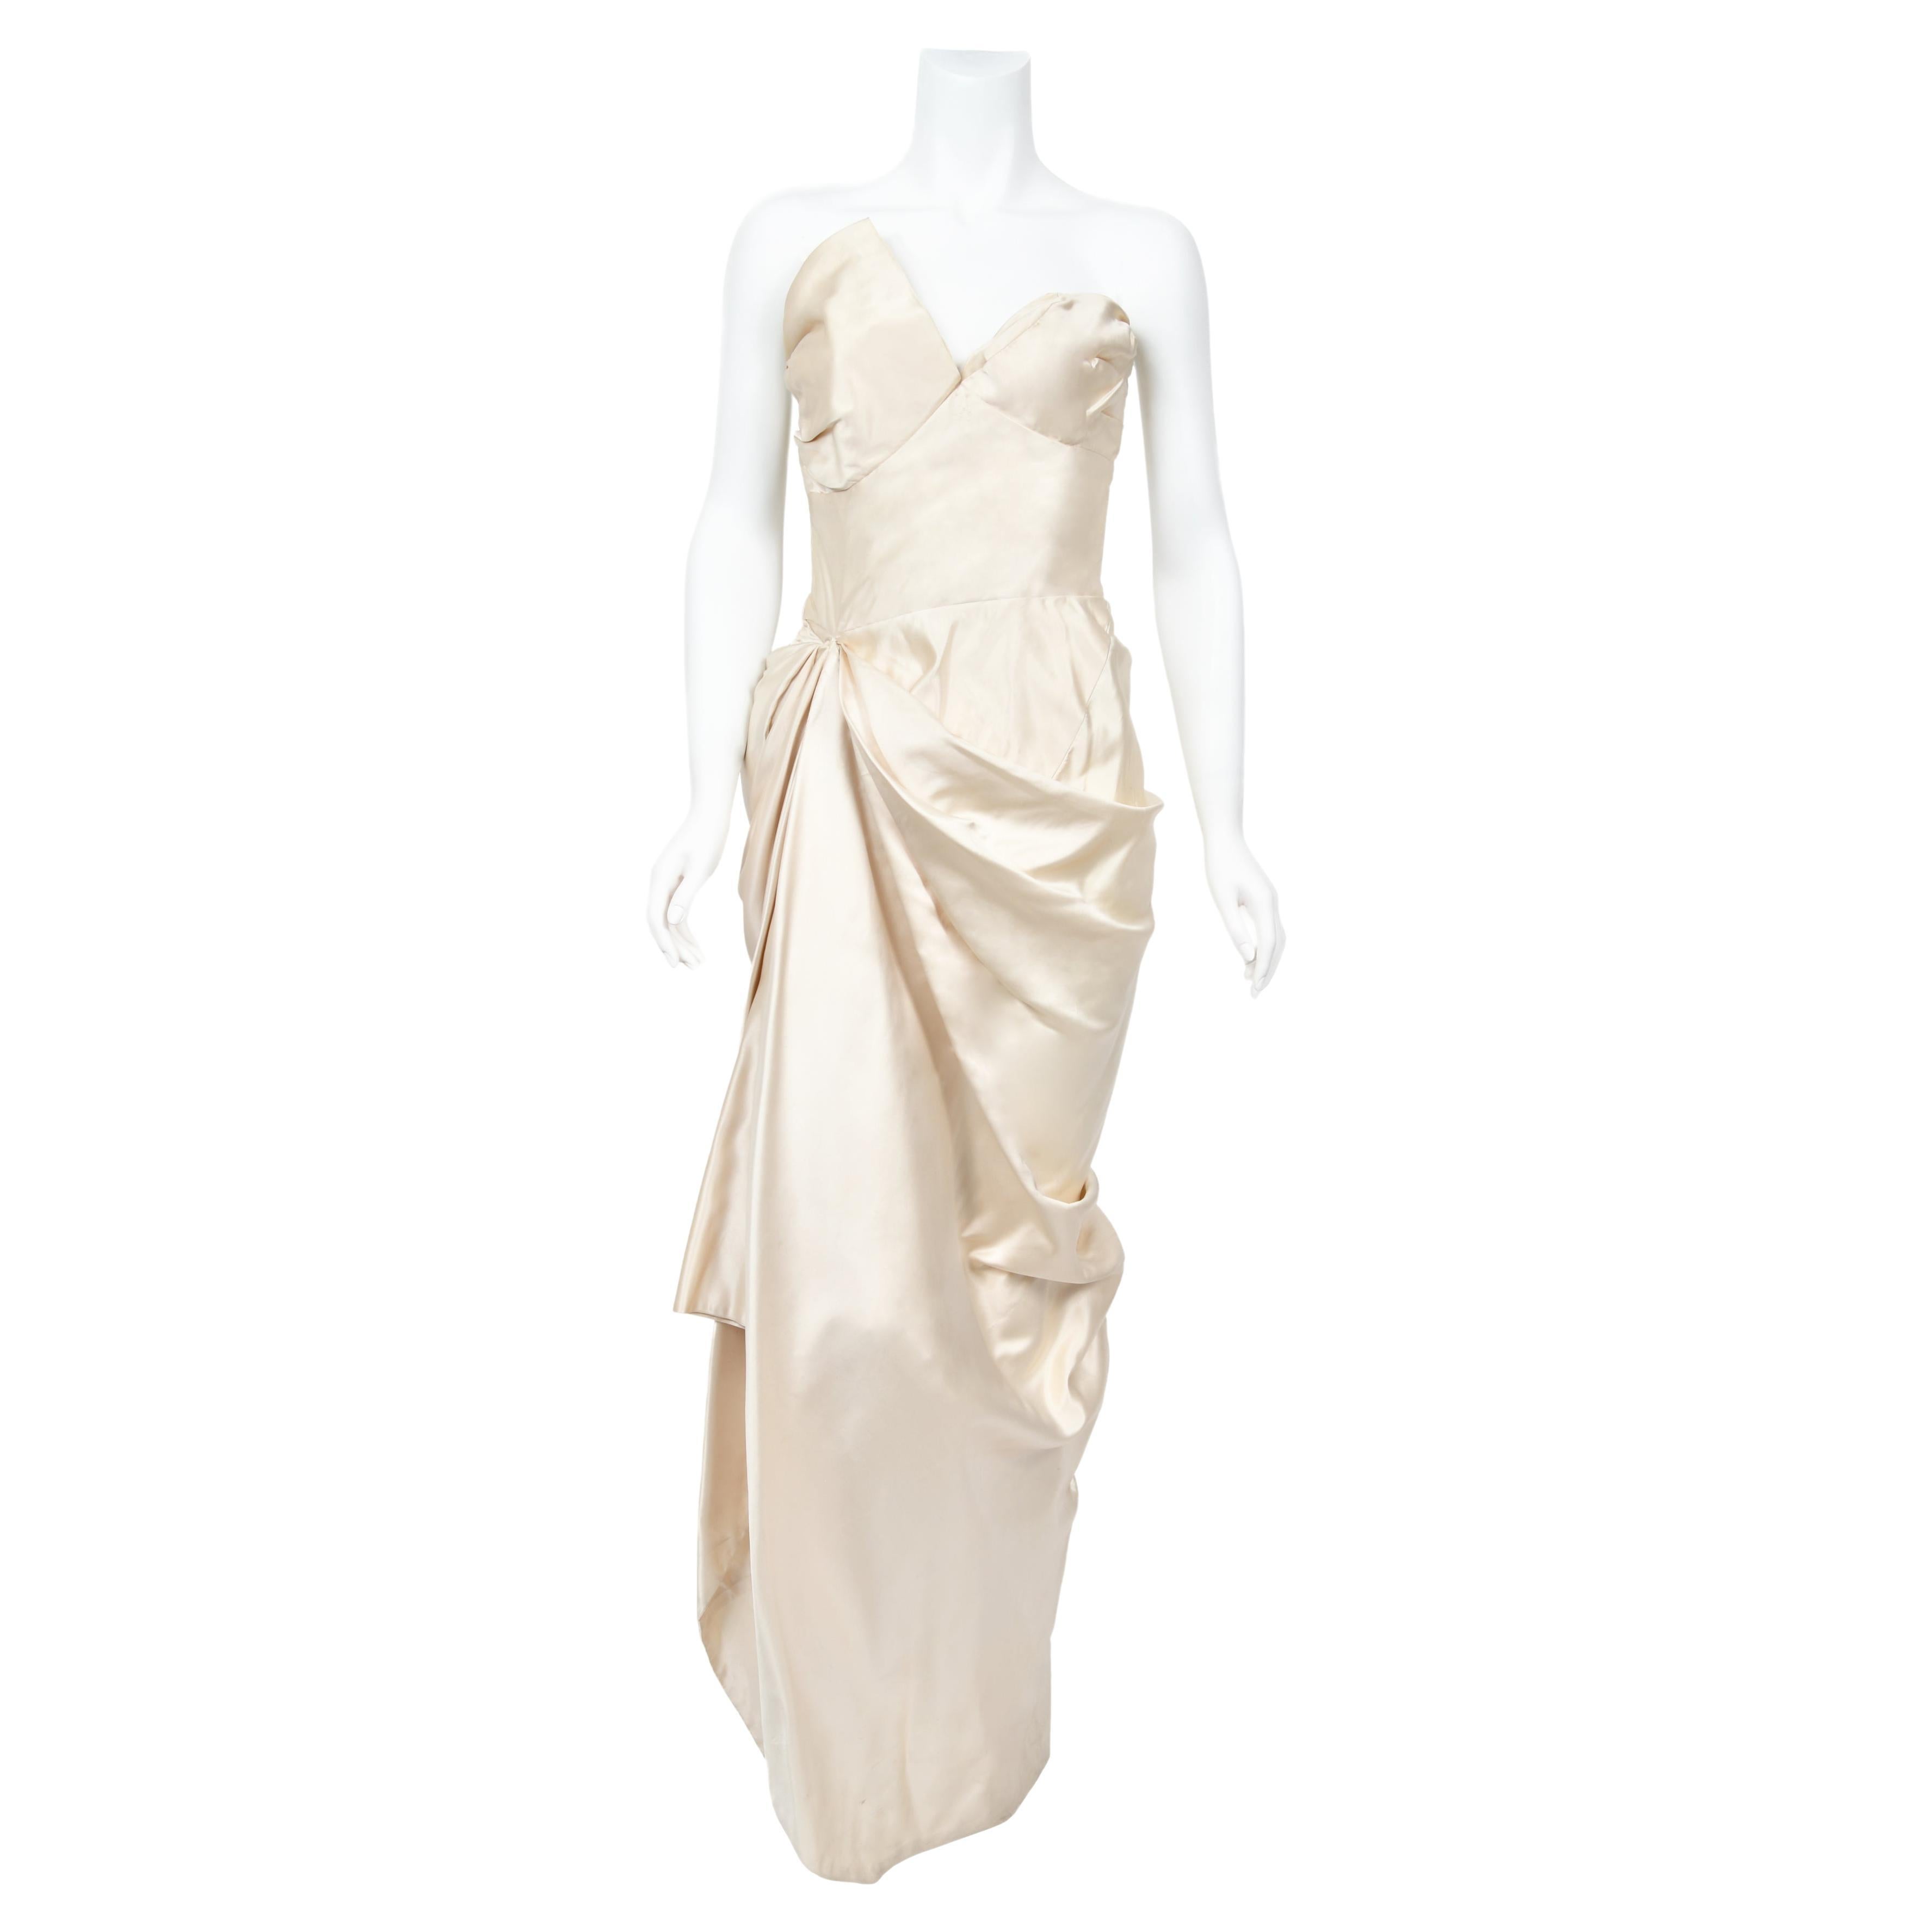 1949 Jeanne Lanvin Haute Couture Ivory Silk Satin Strapless Draped Bridal Gown  For Sale